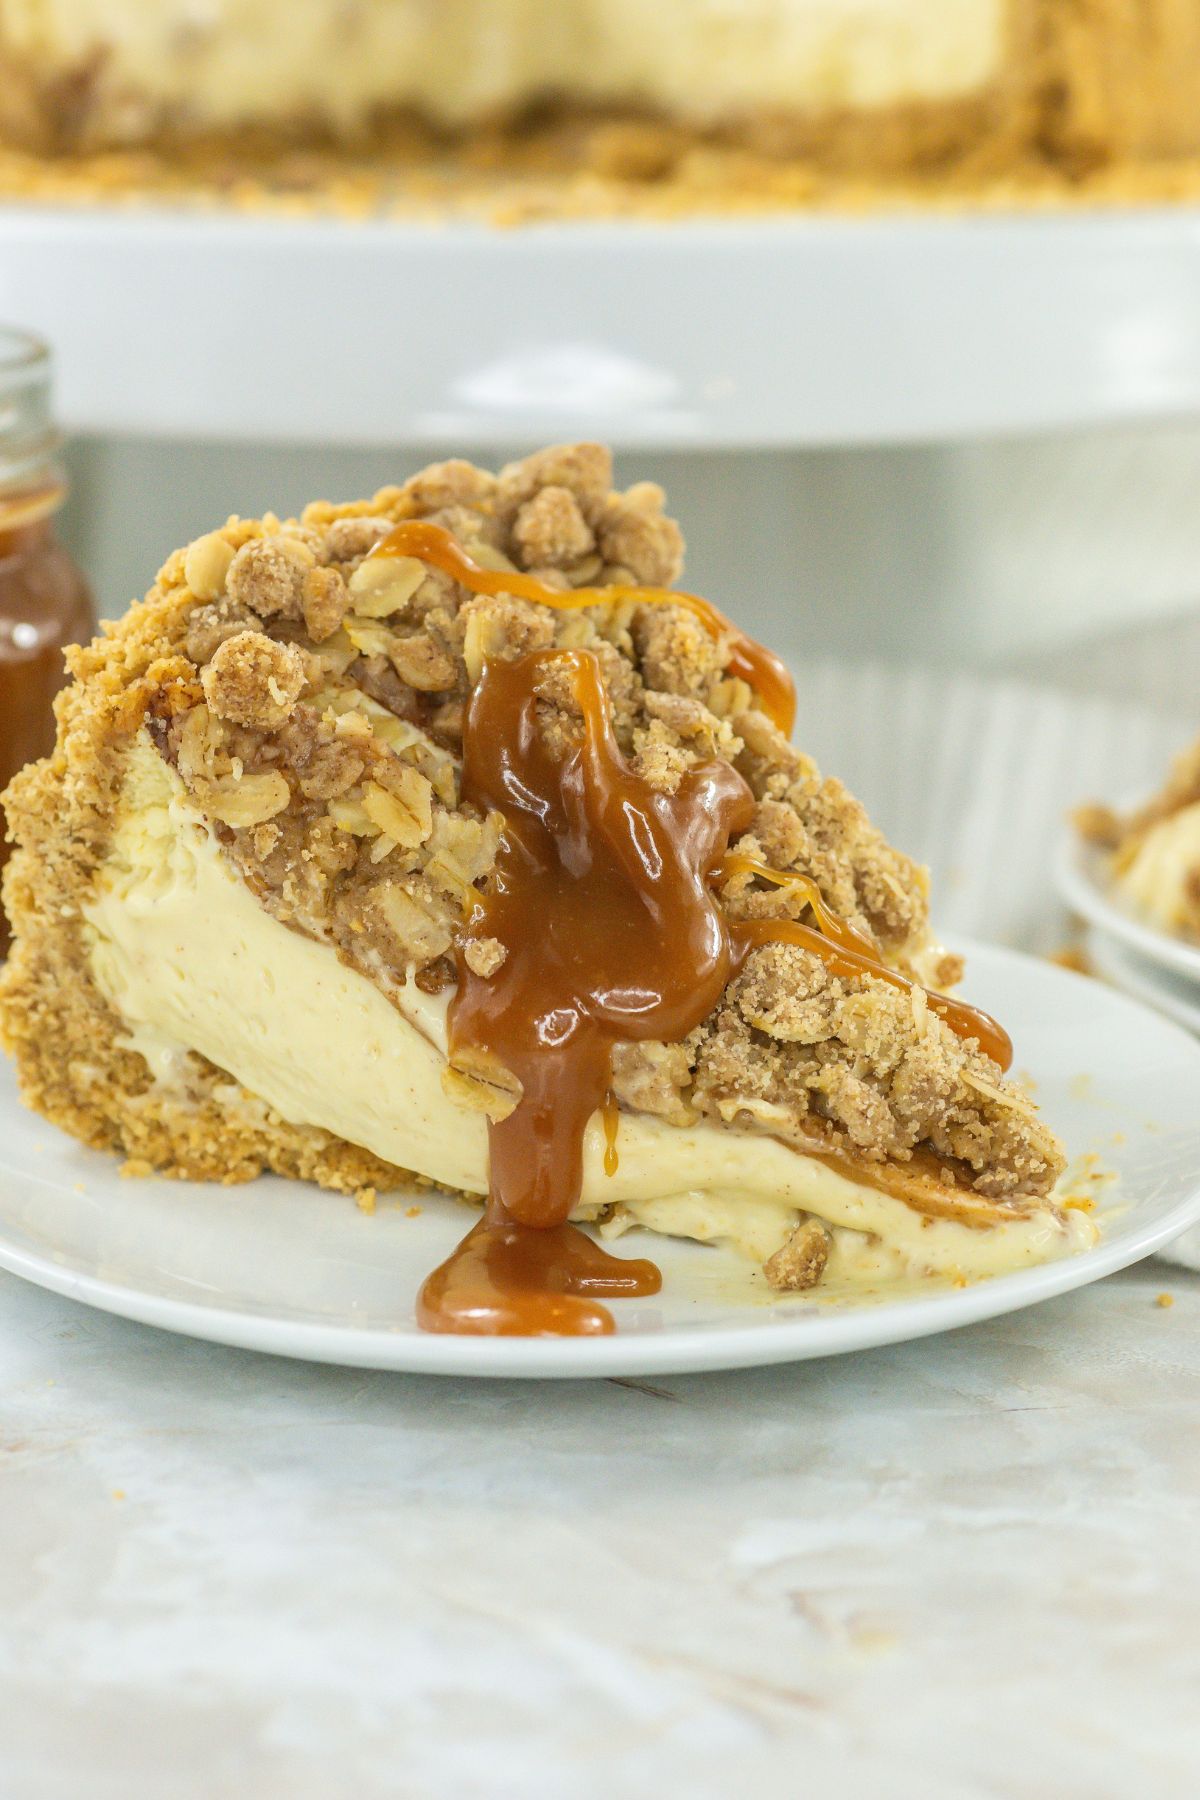 Slice of apple crunch cheesecake on a plate with caramel sauce.